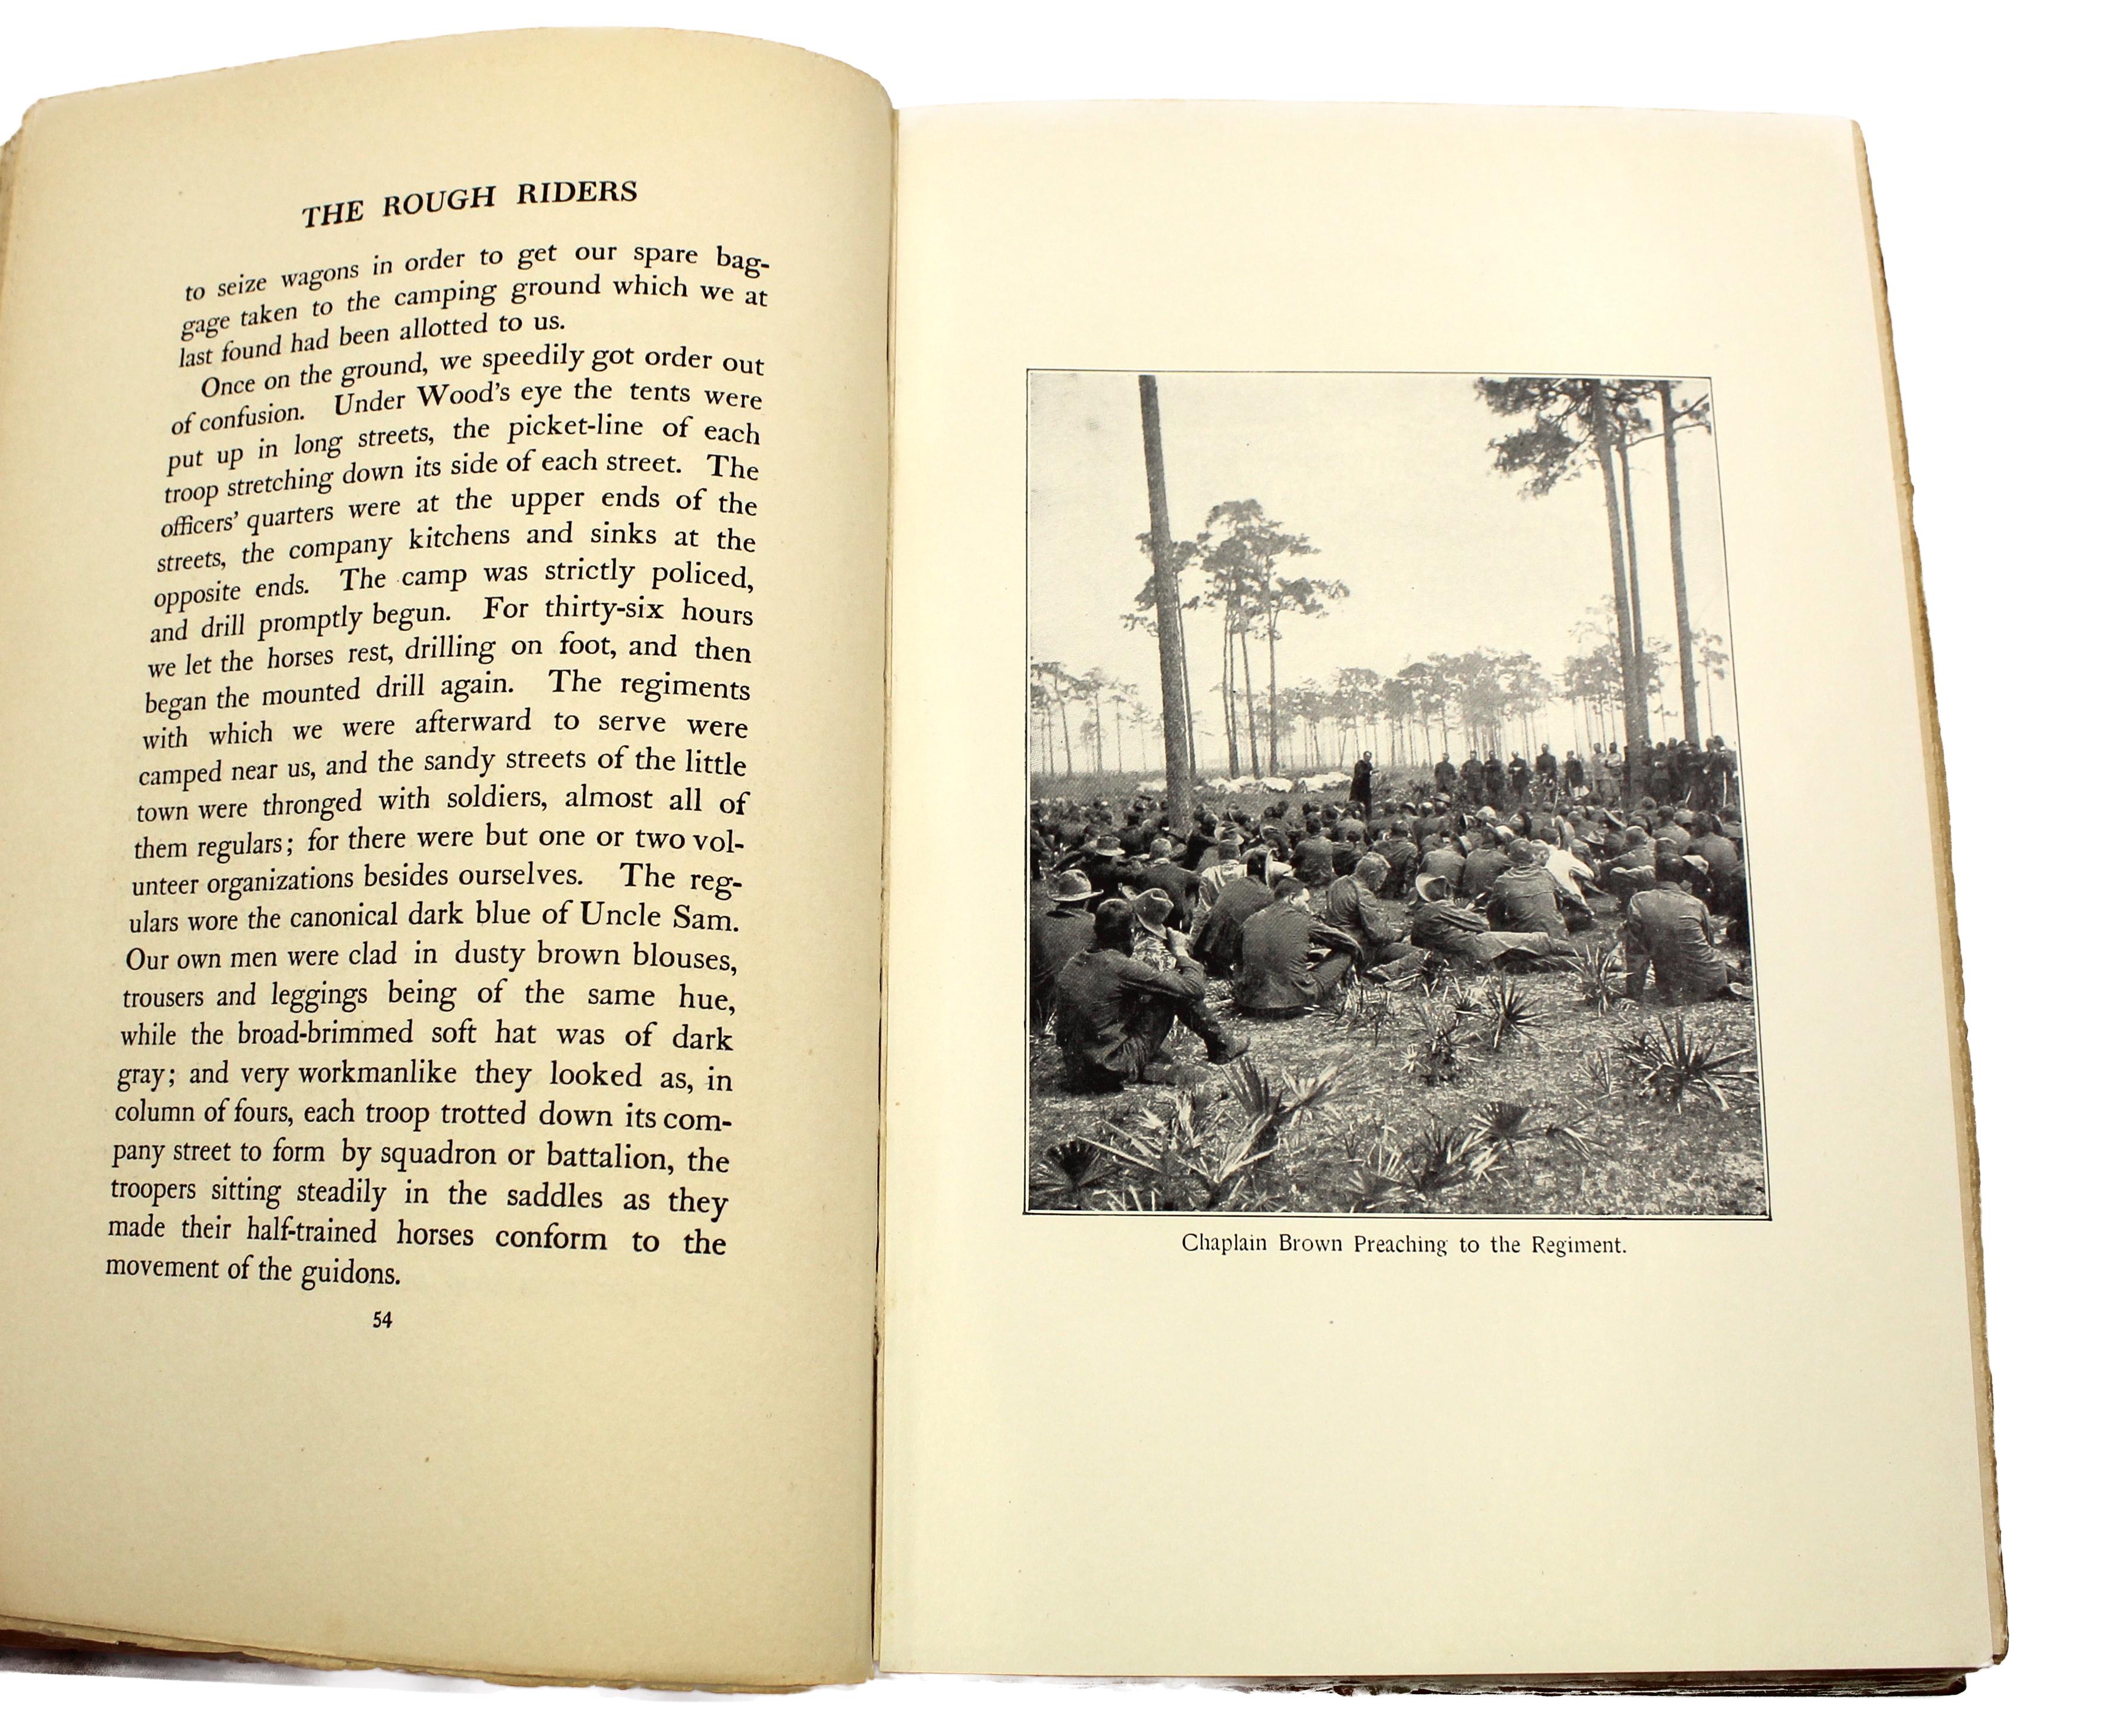 The Rough Riders by Theodore Roosevelt, First Edition, 1899 2